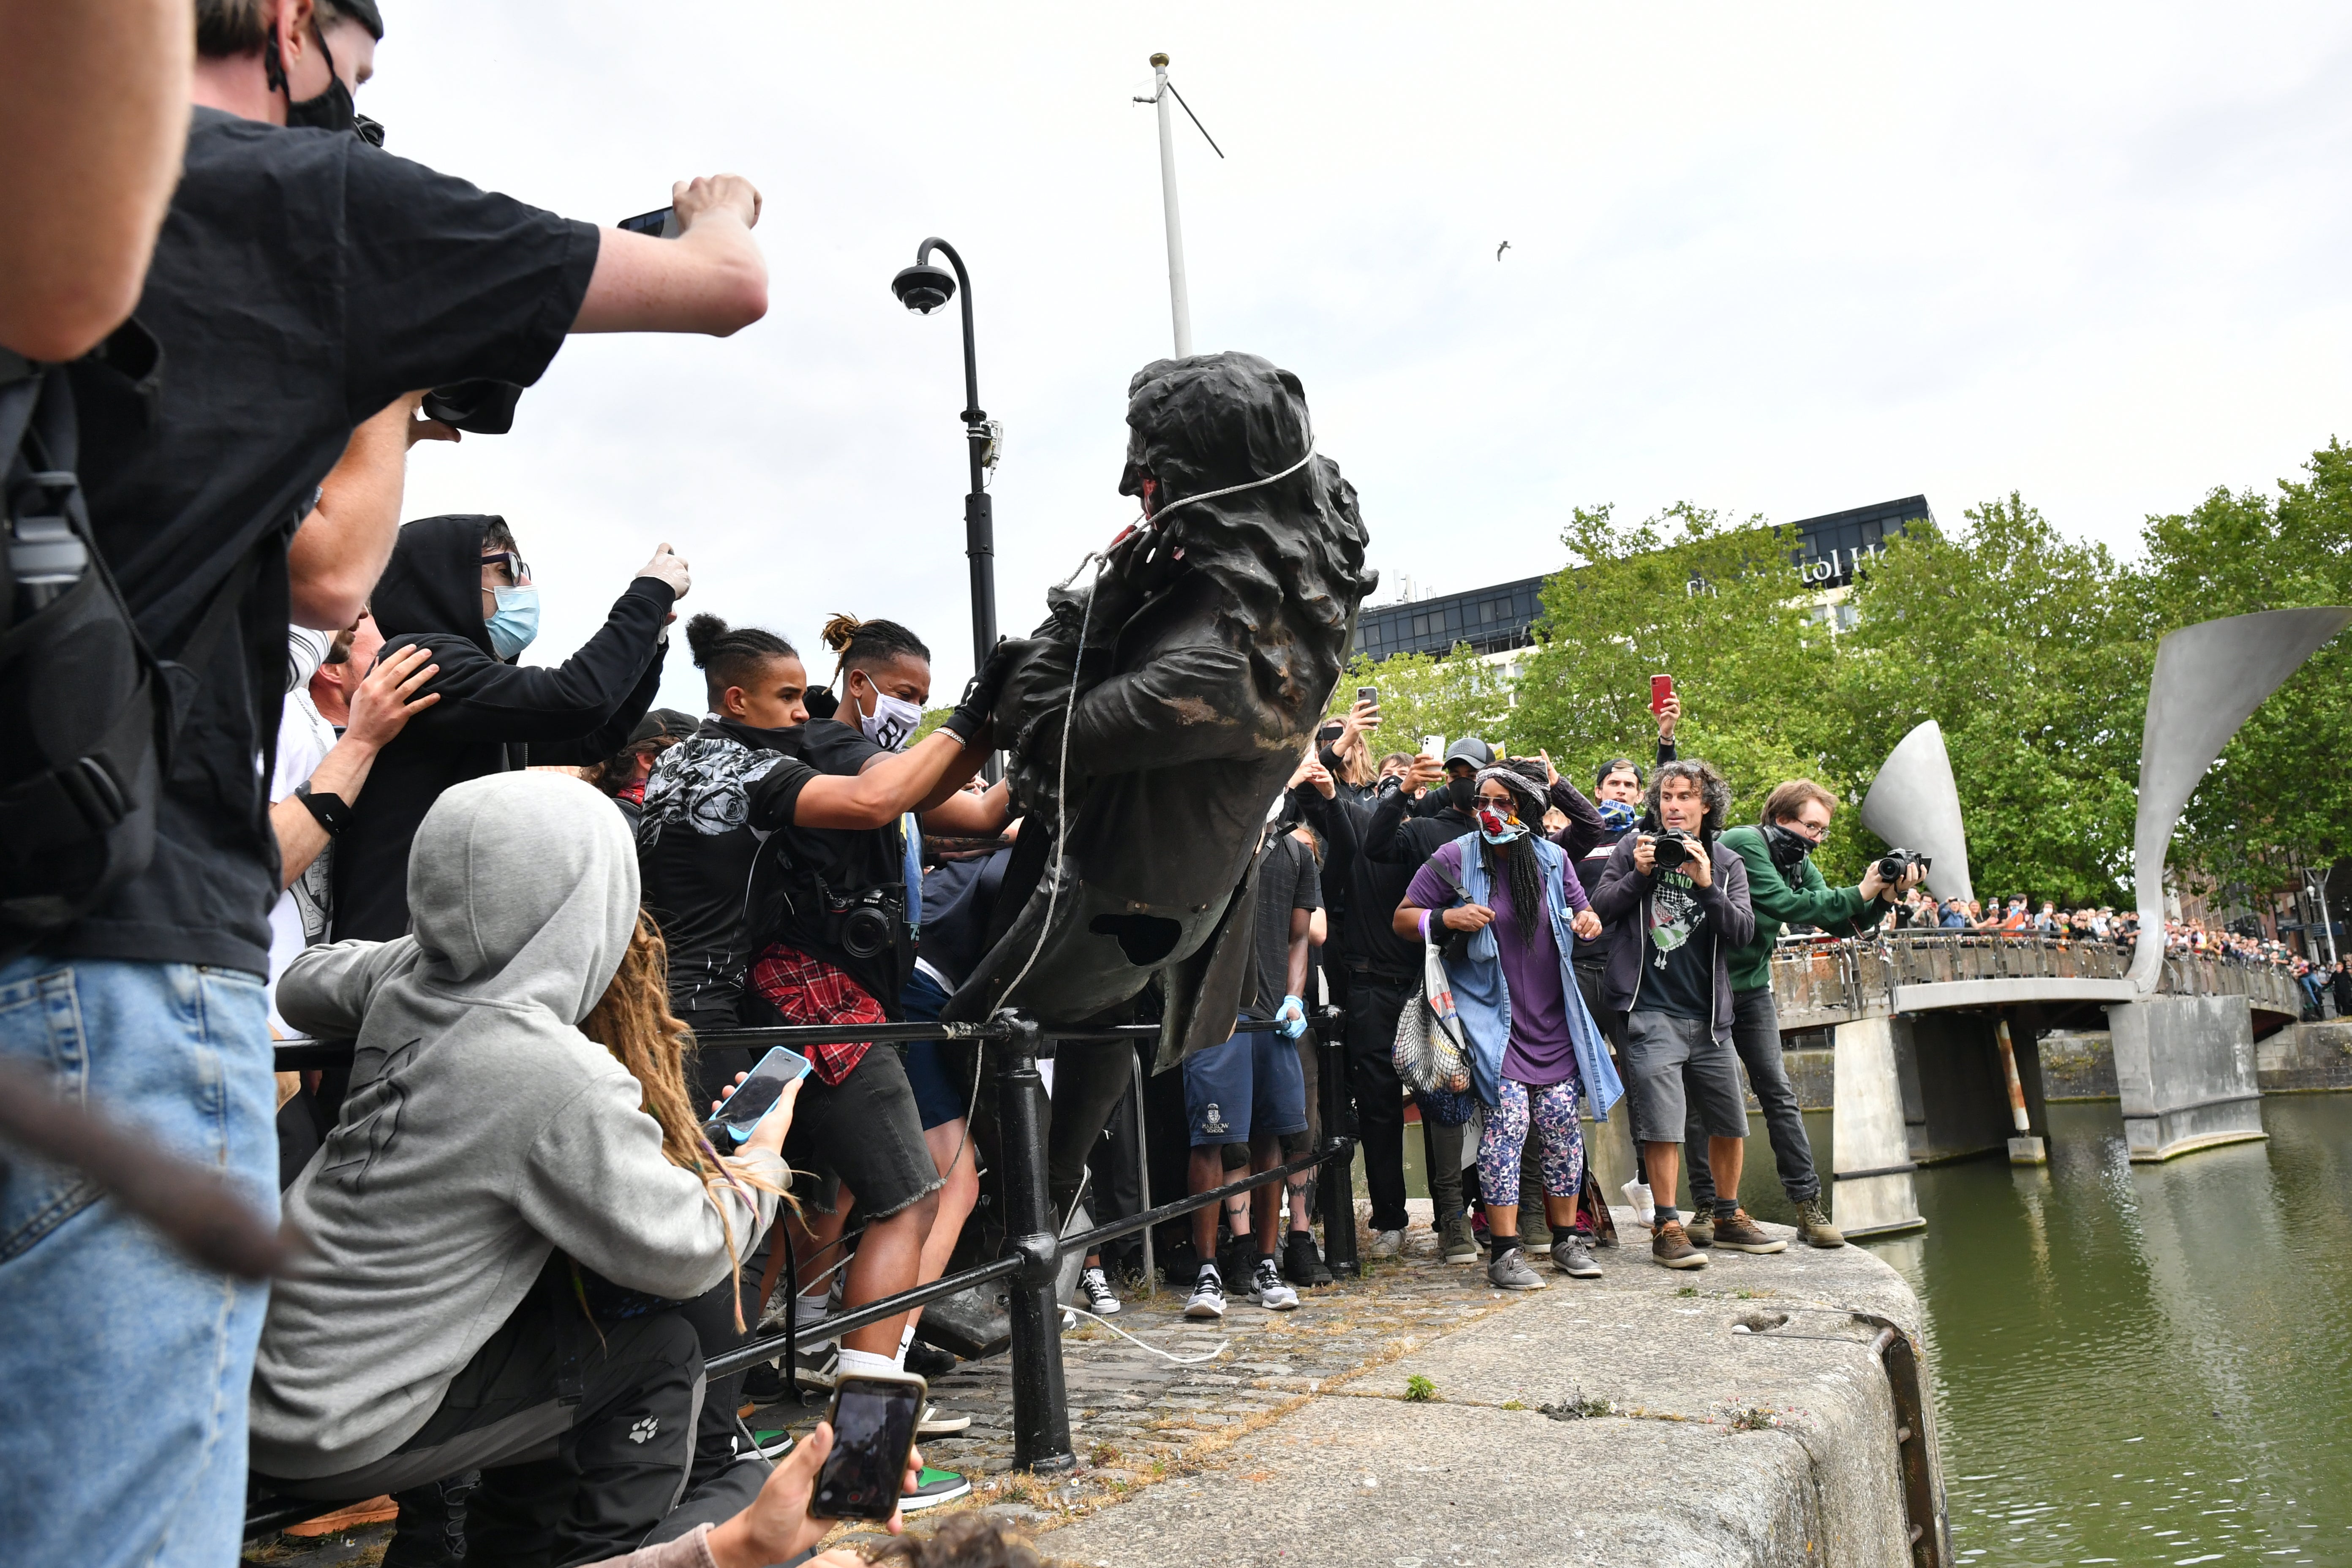 Protesters throw the statue of Edward Colston into Bristol harbour during a Black Lives Matter protest in June 2020 (Ben Birchall/PA)